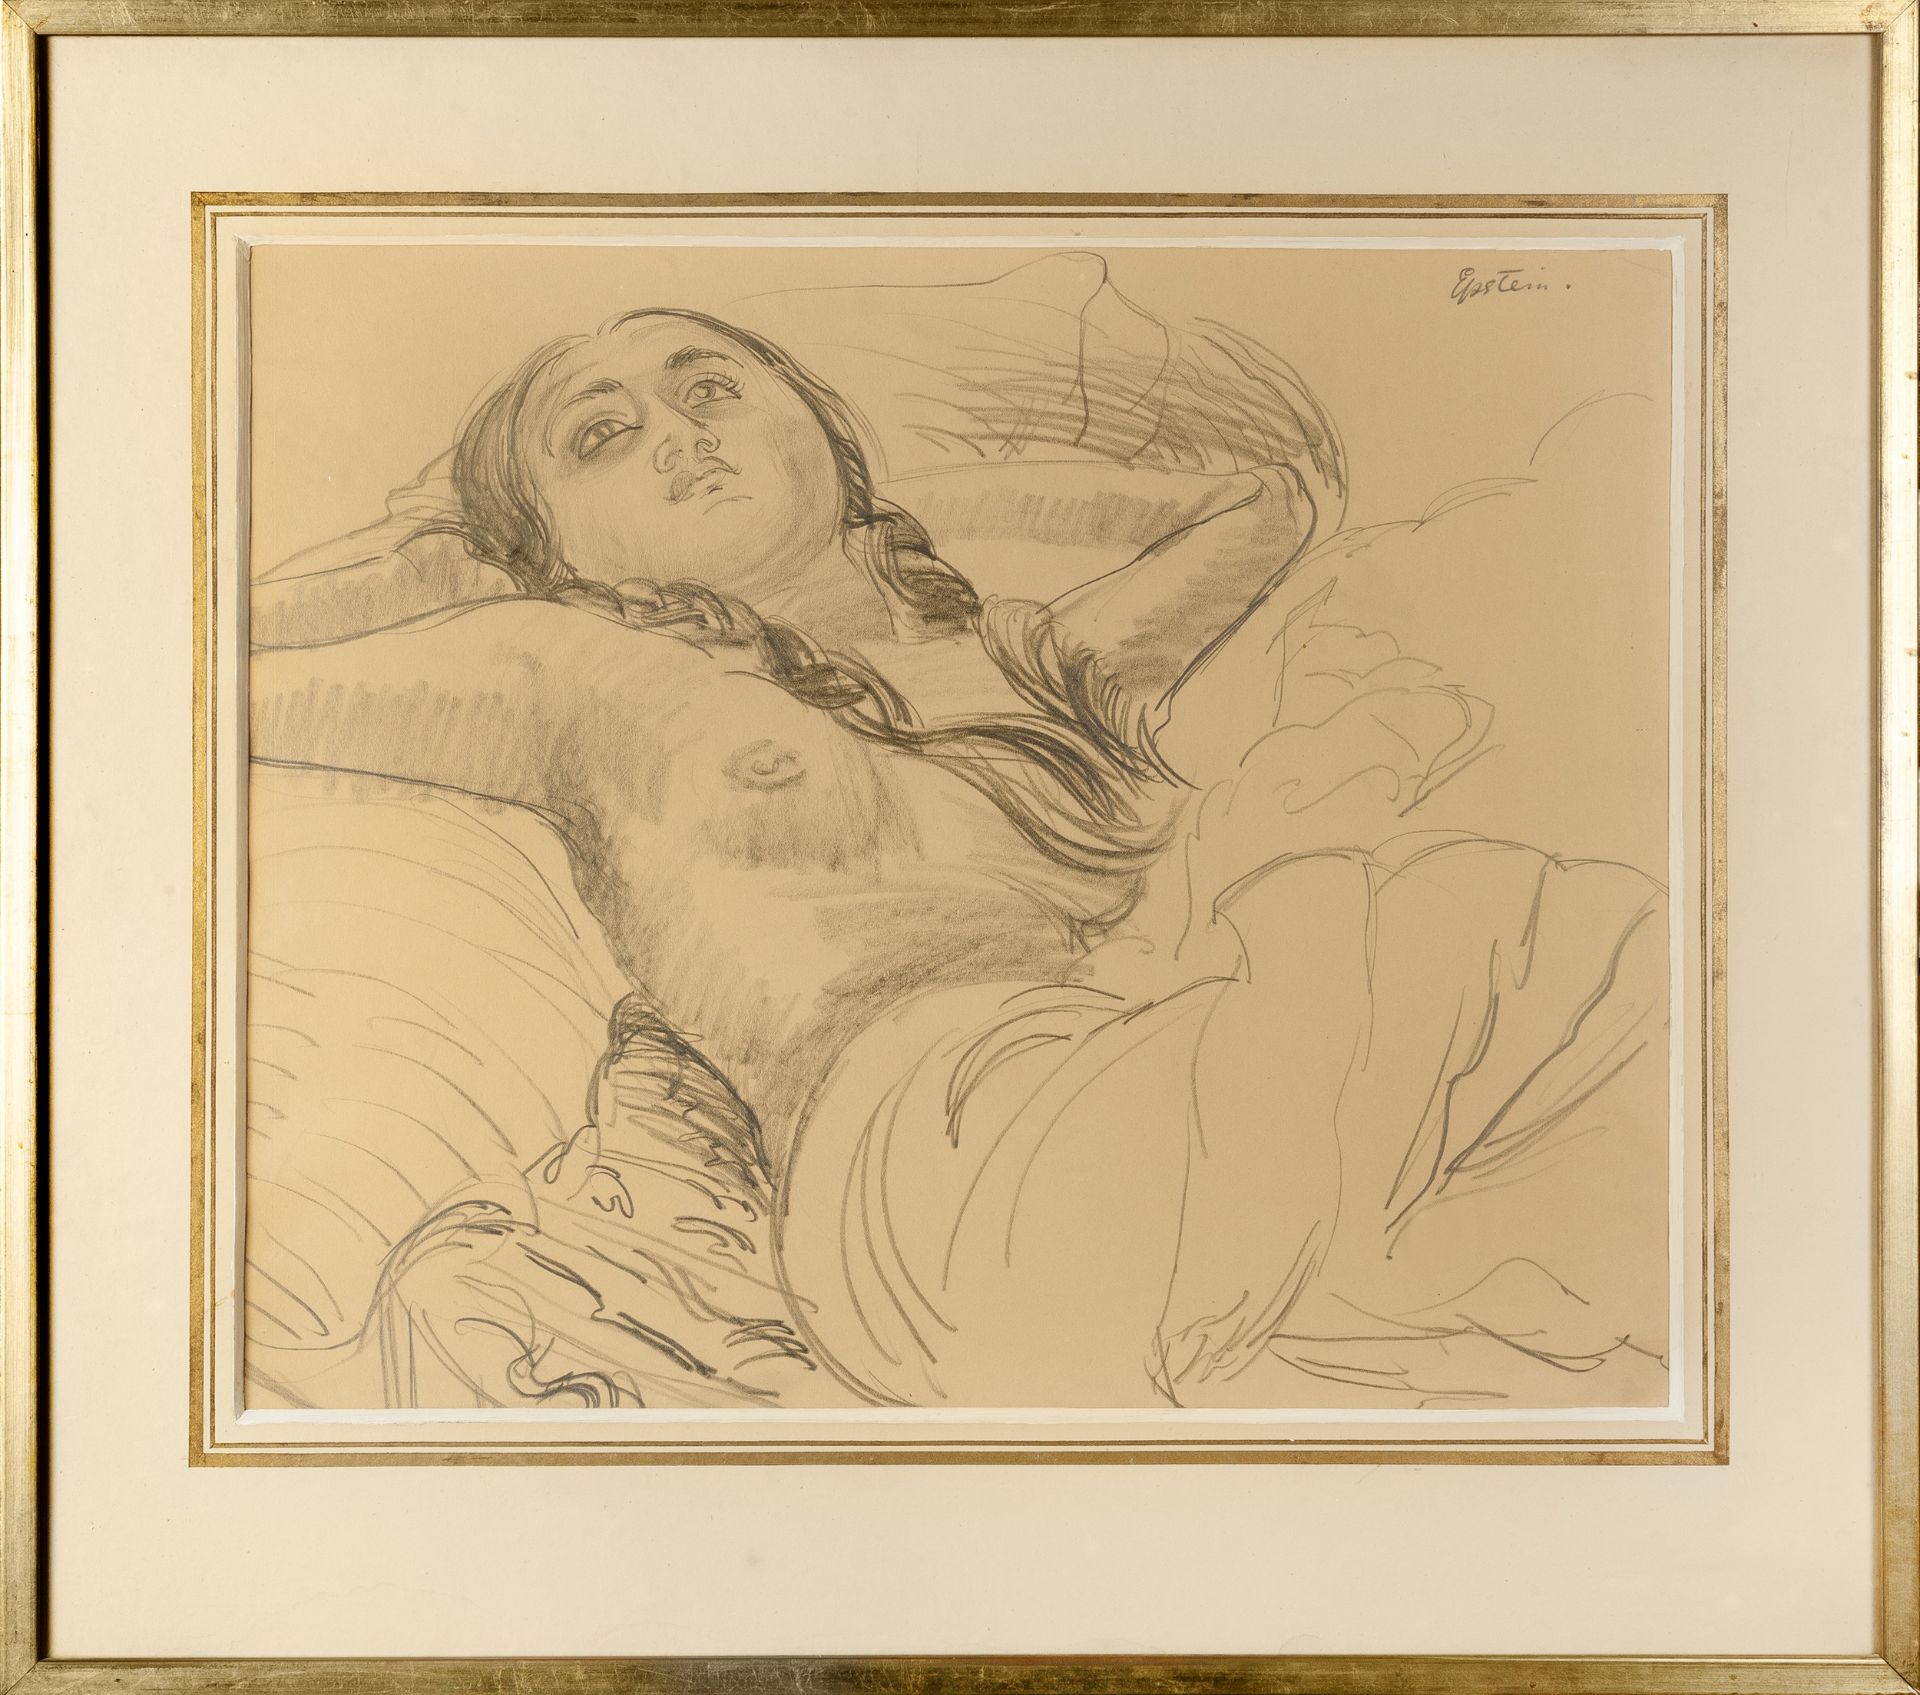 Jacob Epstein (1880-1959) Sunita signed (upper right) pencil on paper 45 x 54cm. Provenance: Roland, - Image 2 of 3